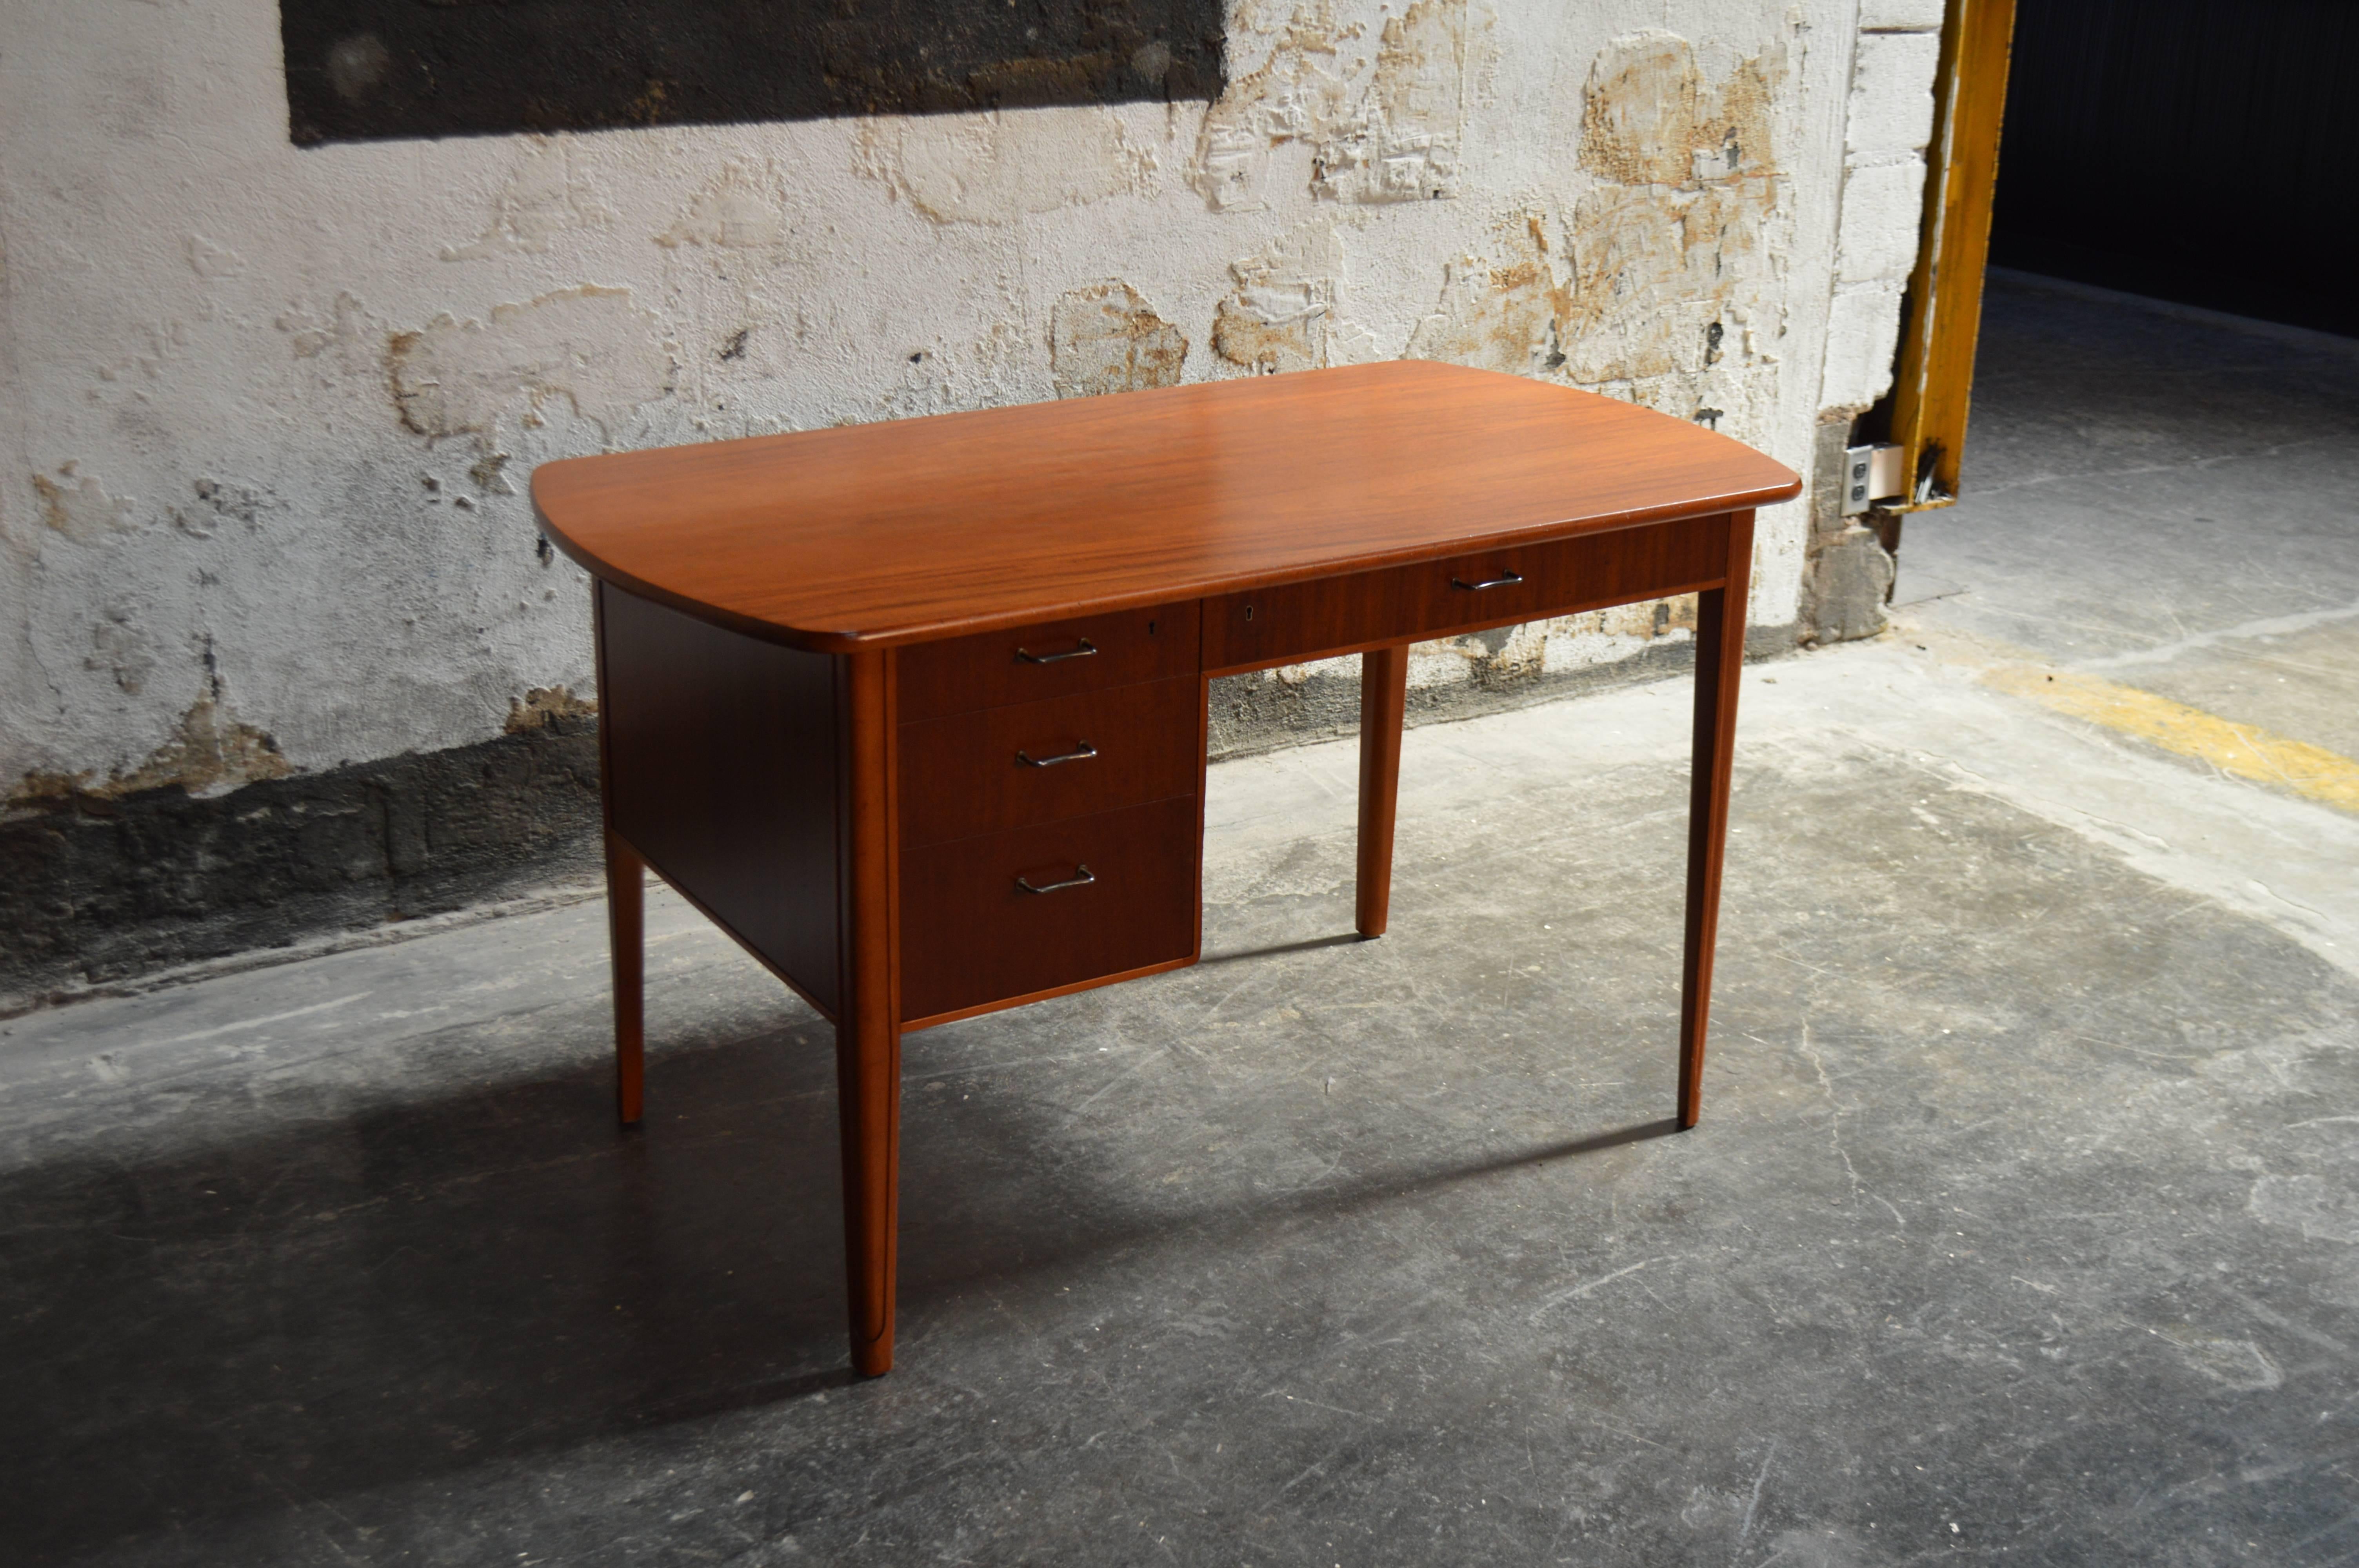 Handsome Swedish Art Moderne desk. Made of mahogany. Ample storage space detailed with brass pulls atop streamlined tapered legs. Finished on all sides and lockable drawers.